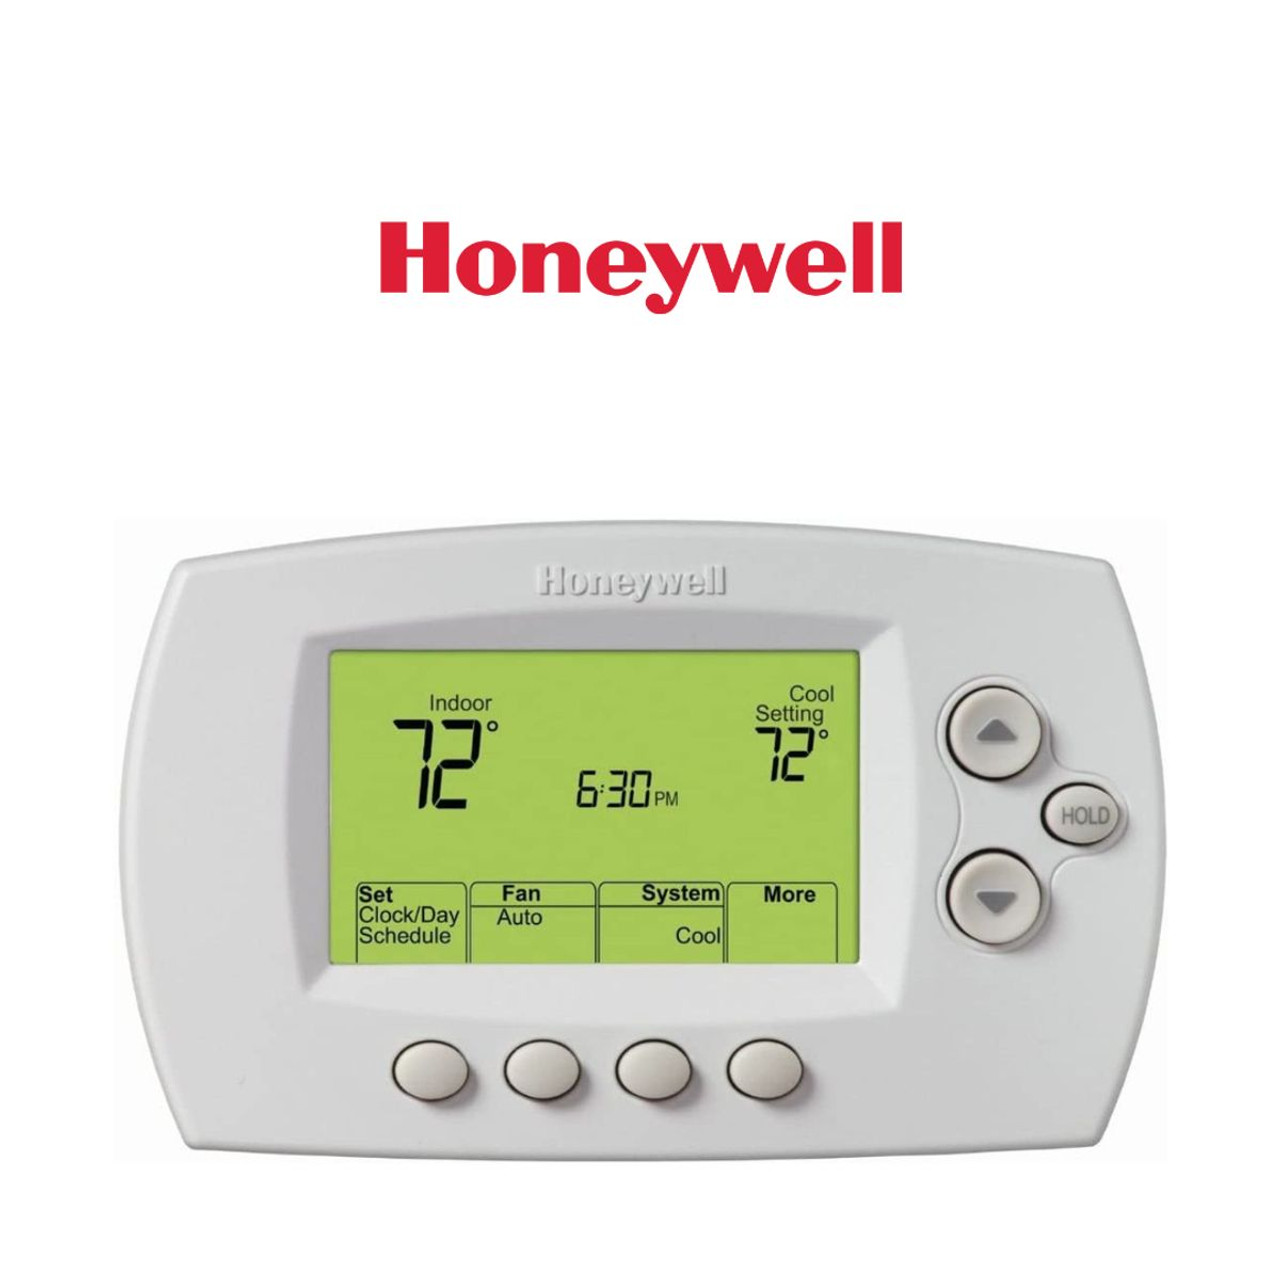 Honeywell Wireless FocusPro Comfort System 5-1-1/5-2 Day Programmable Thermostat